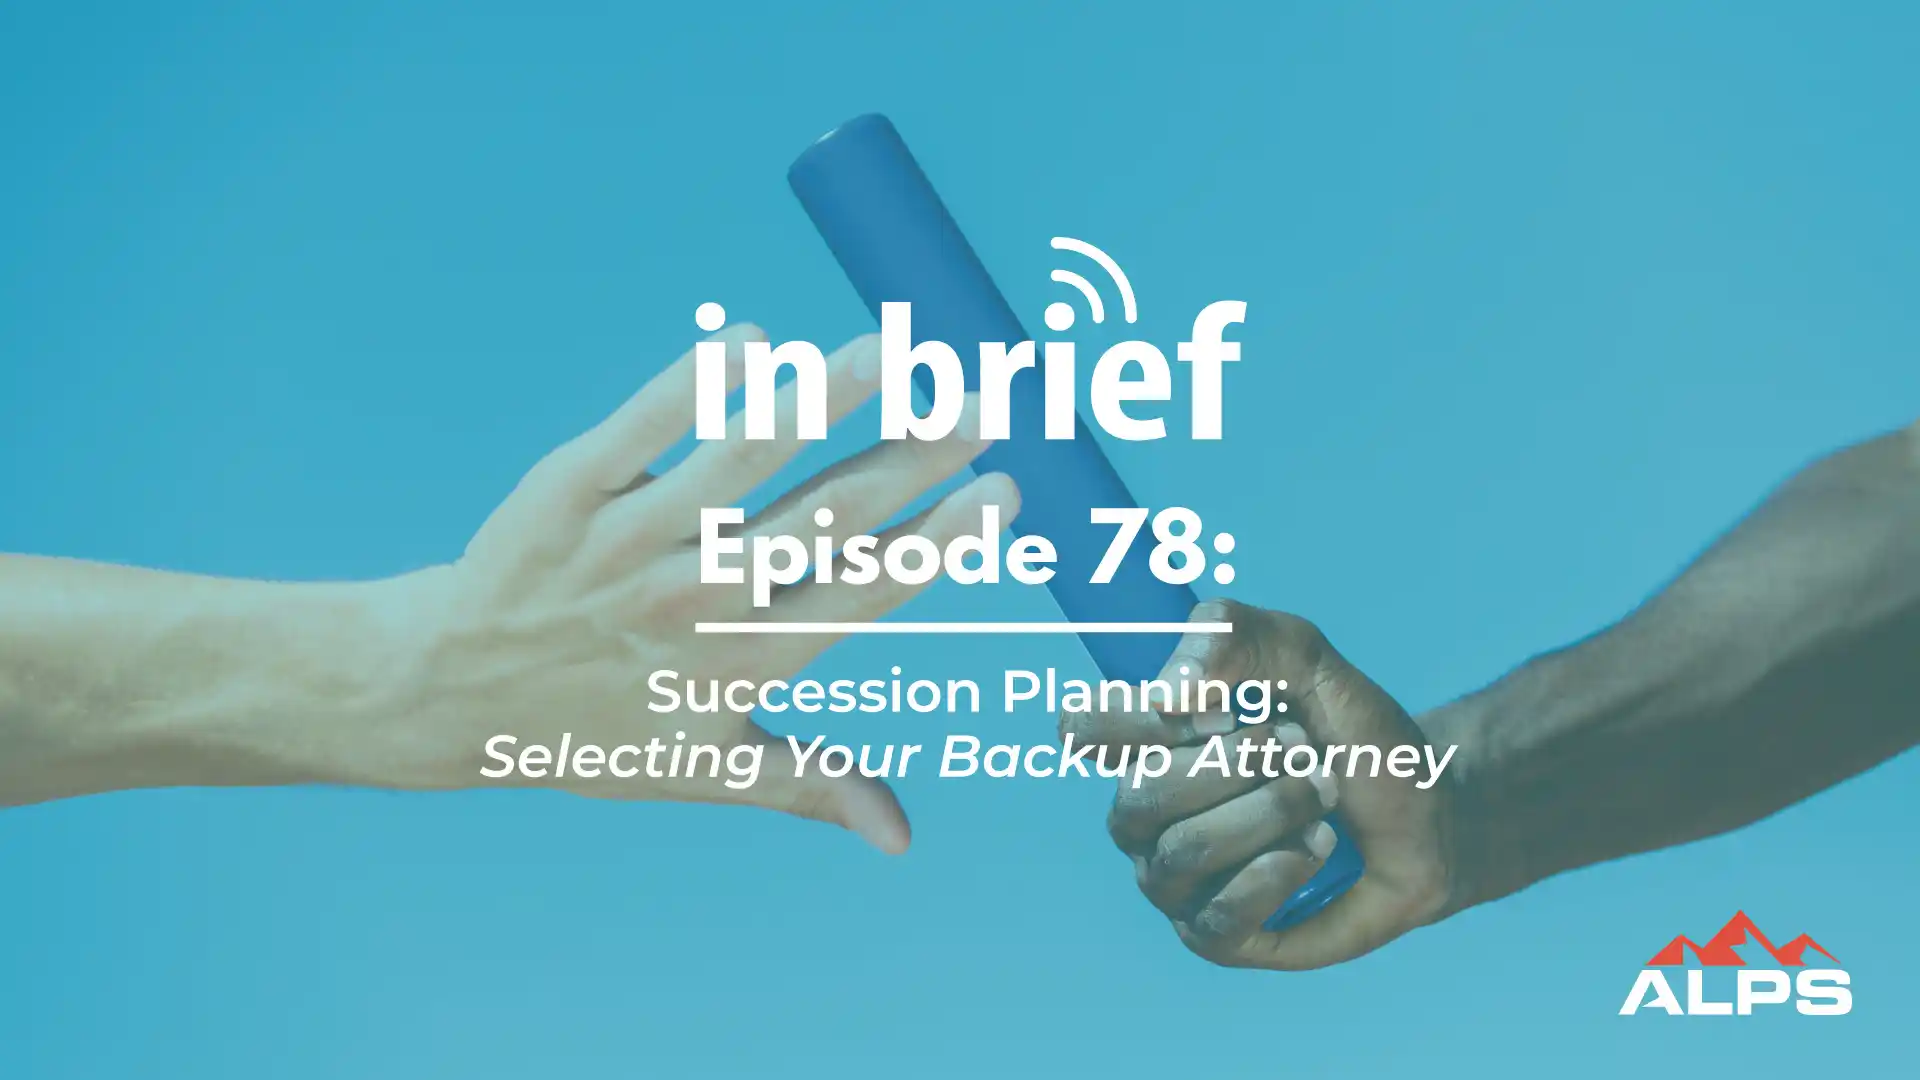 ALPS In Brief Podcast - Episode 78: Succession Planning & Selecting a Backup Attorney